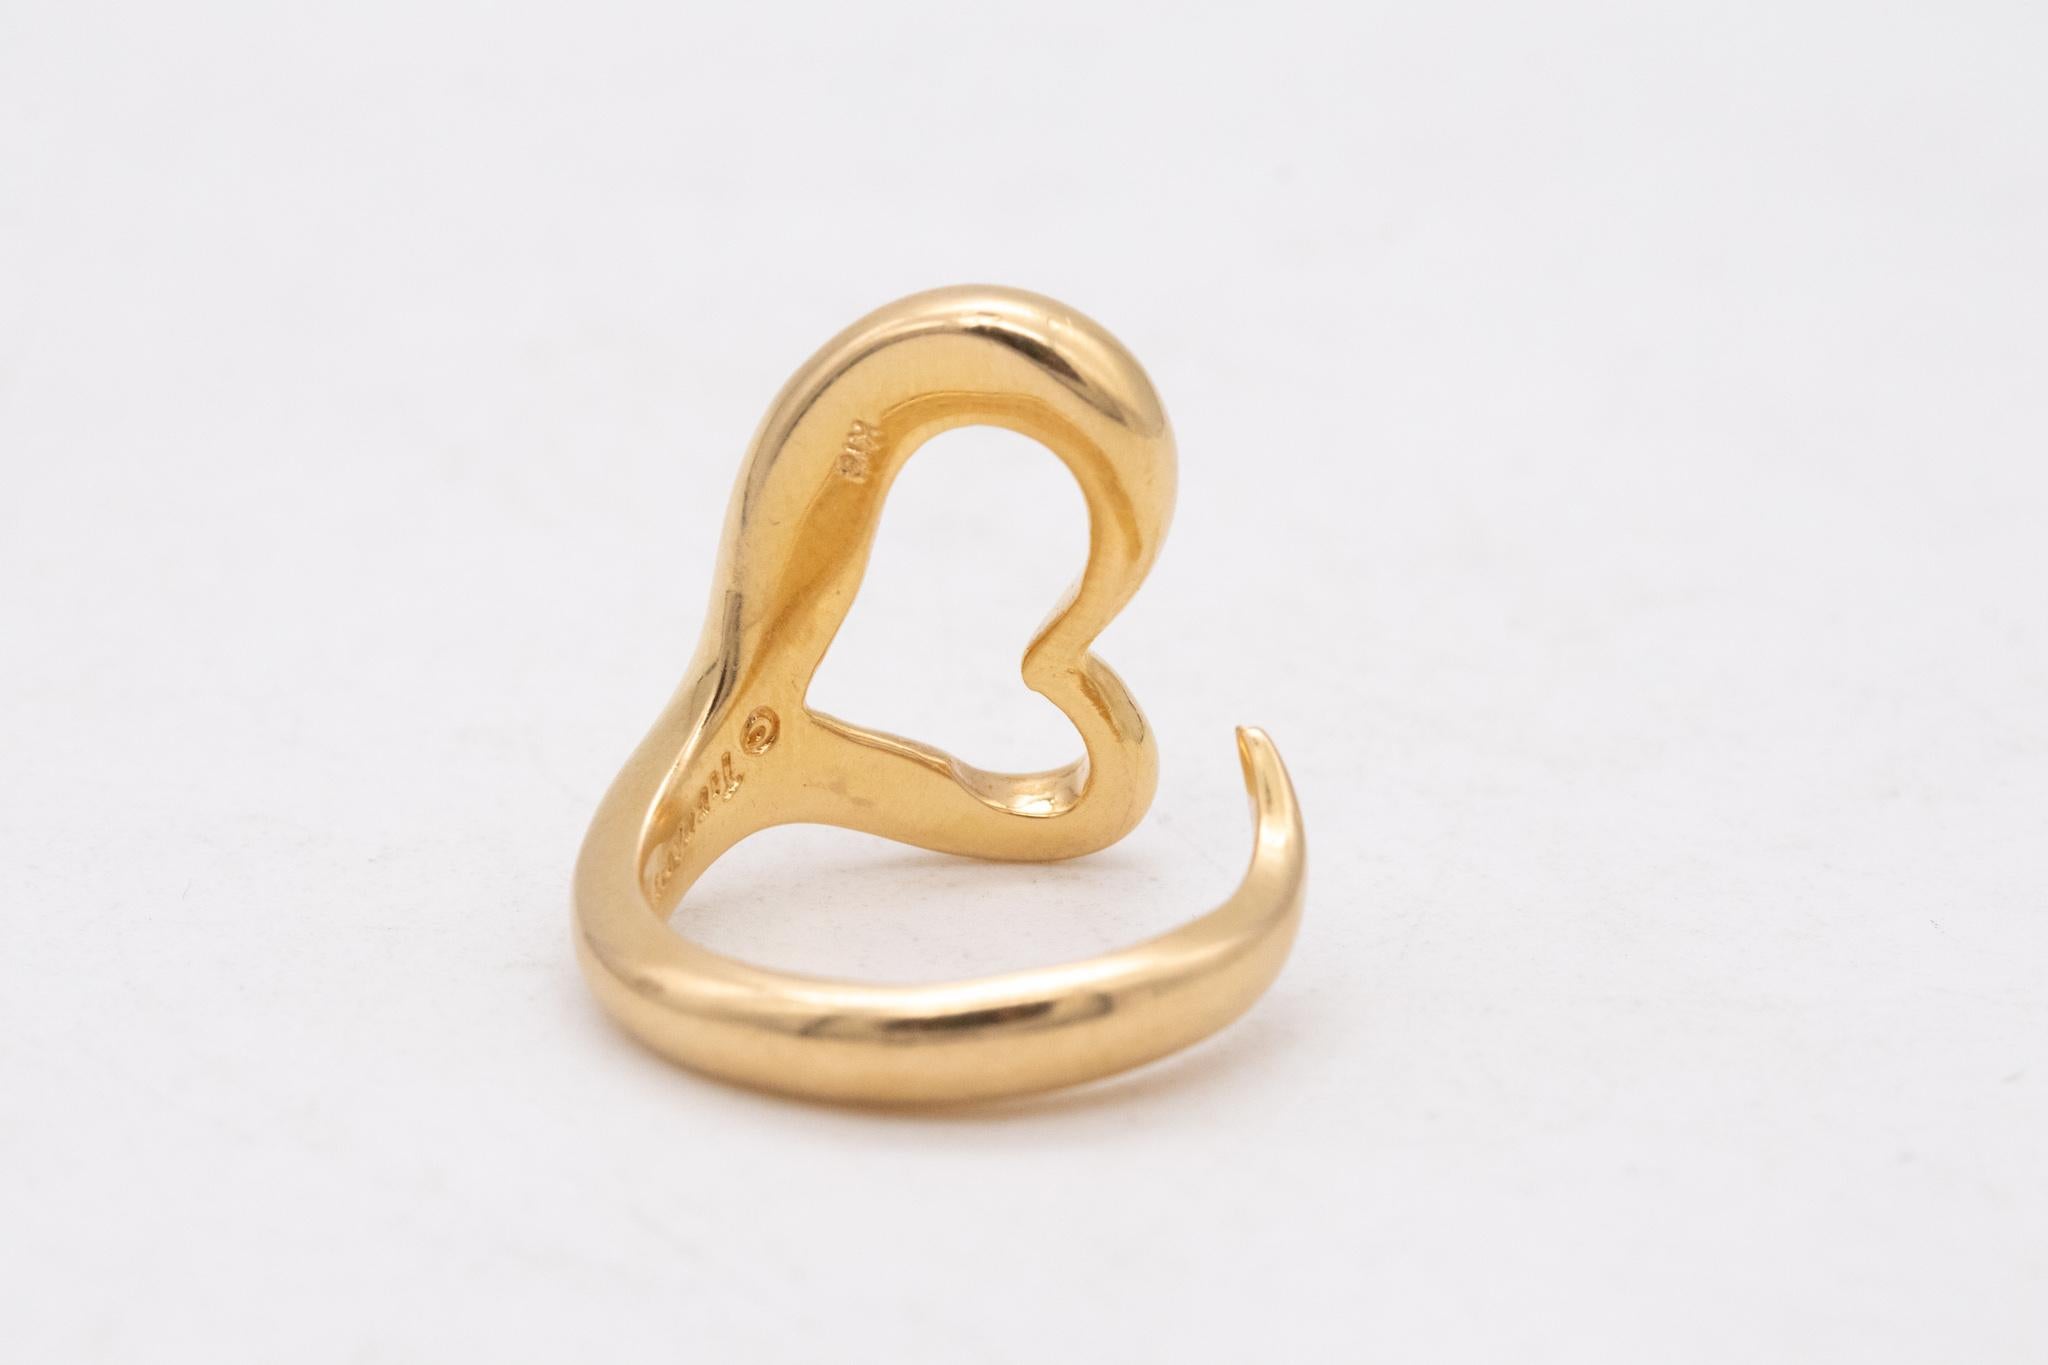 Modernist Tiffany & Co. 1980 Elsa Peretti Open Heart Ring In Solid 18Kt Yellow Gold Size 6 For Sale